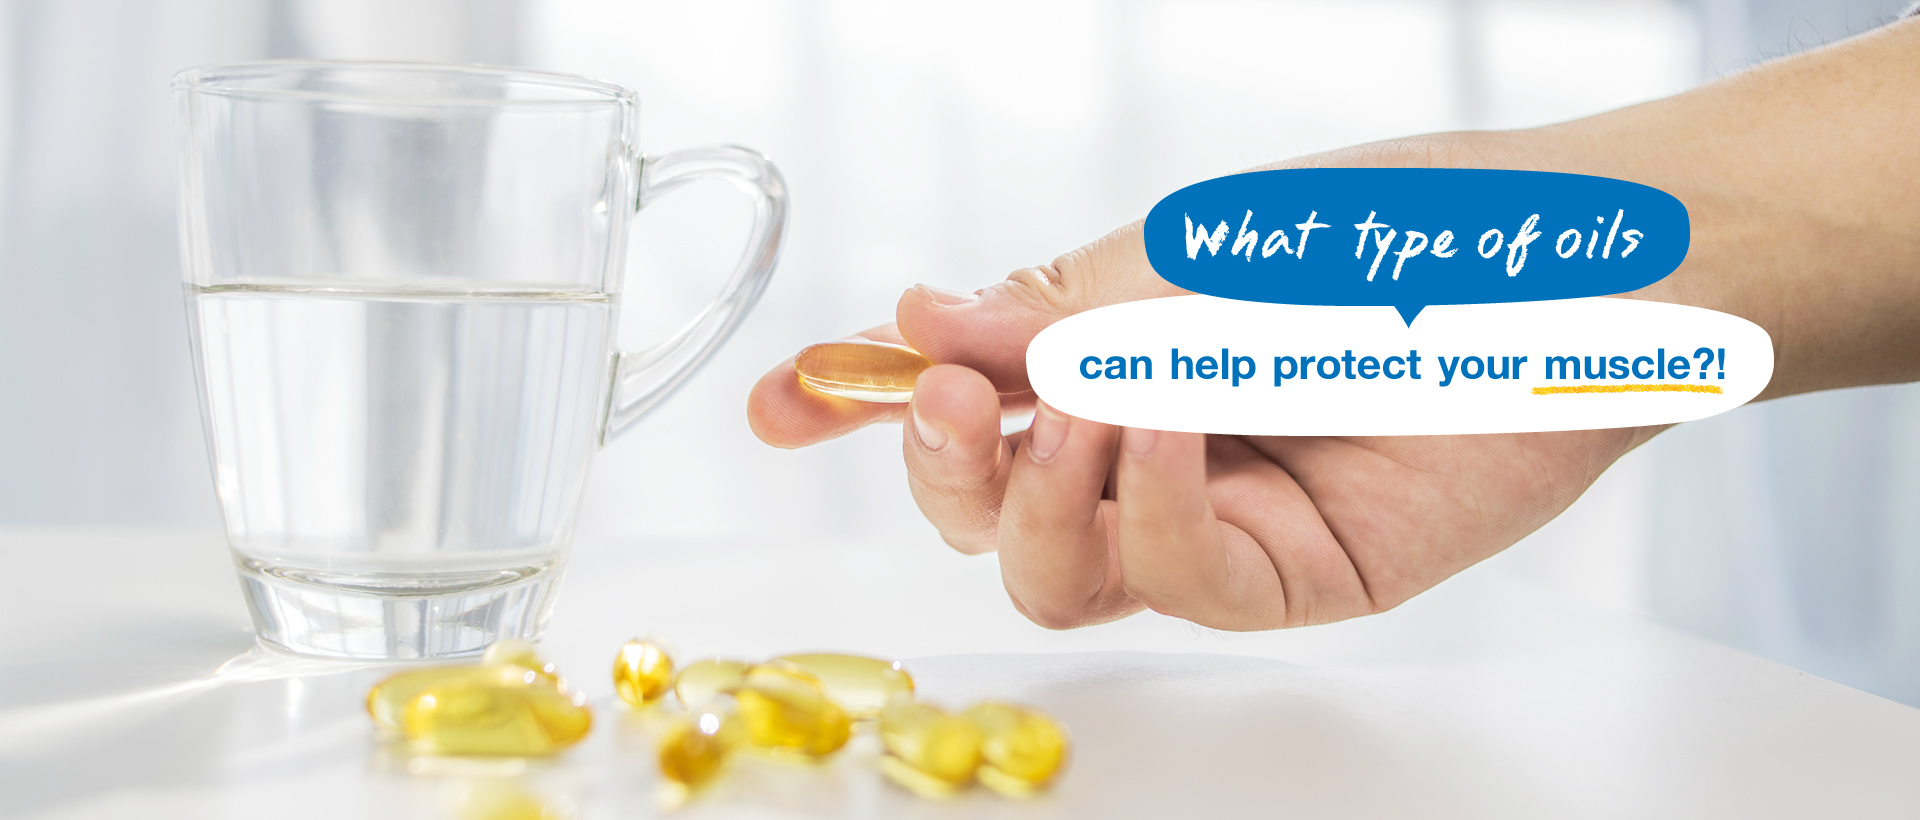 How fish oil may help muscle strength